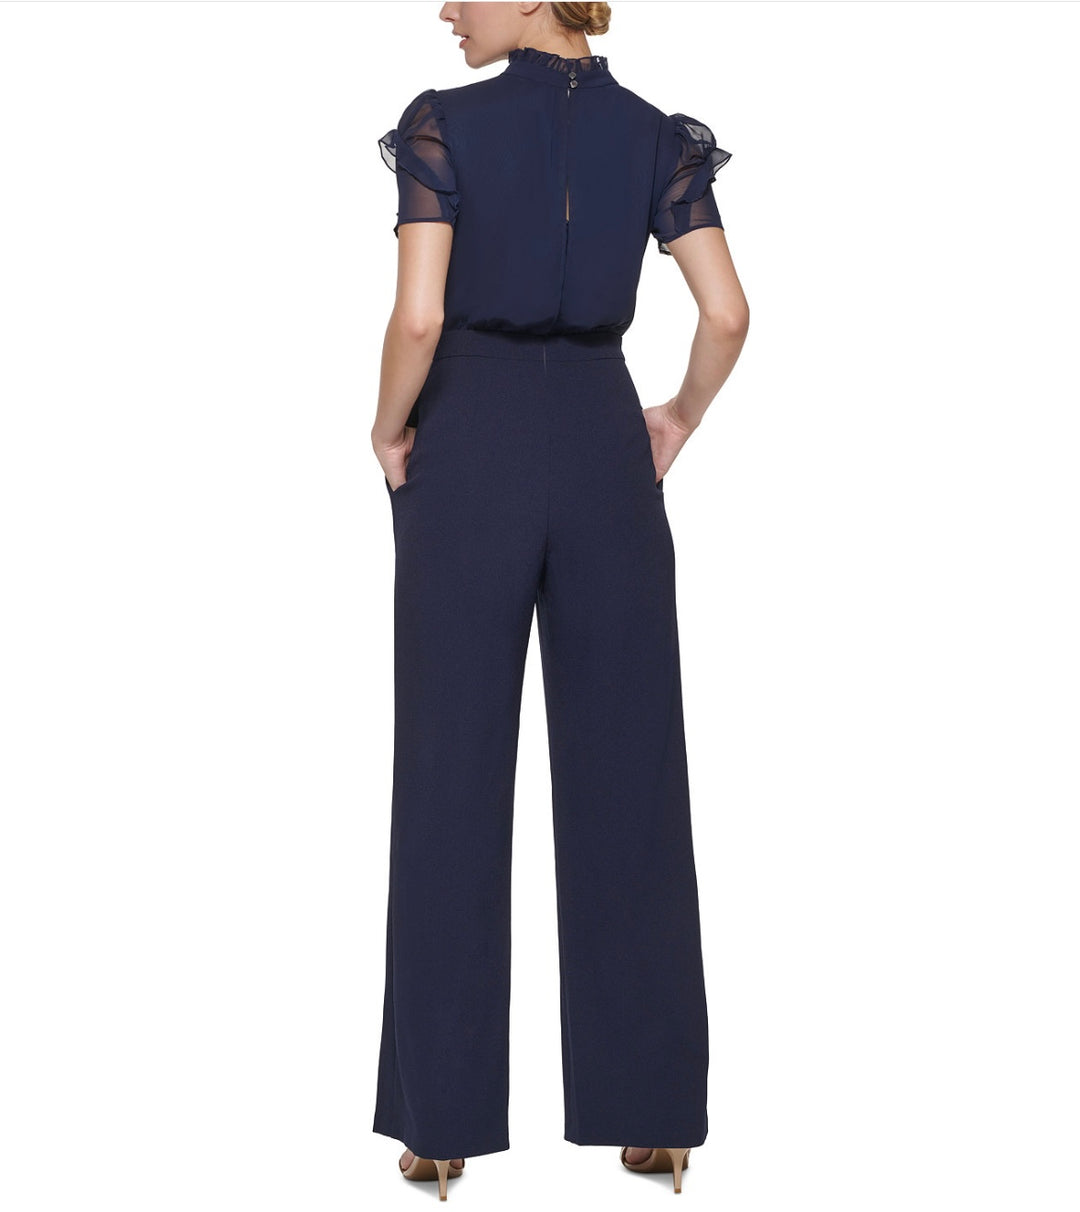 Vince Camuto Women's Mixed Media Wide Leg Jumpsuit Navy Size 8